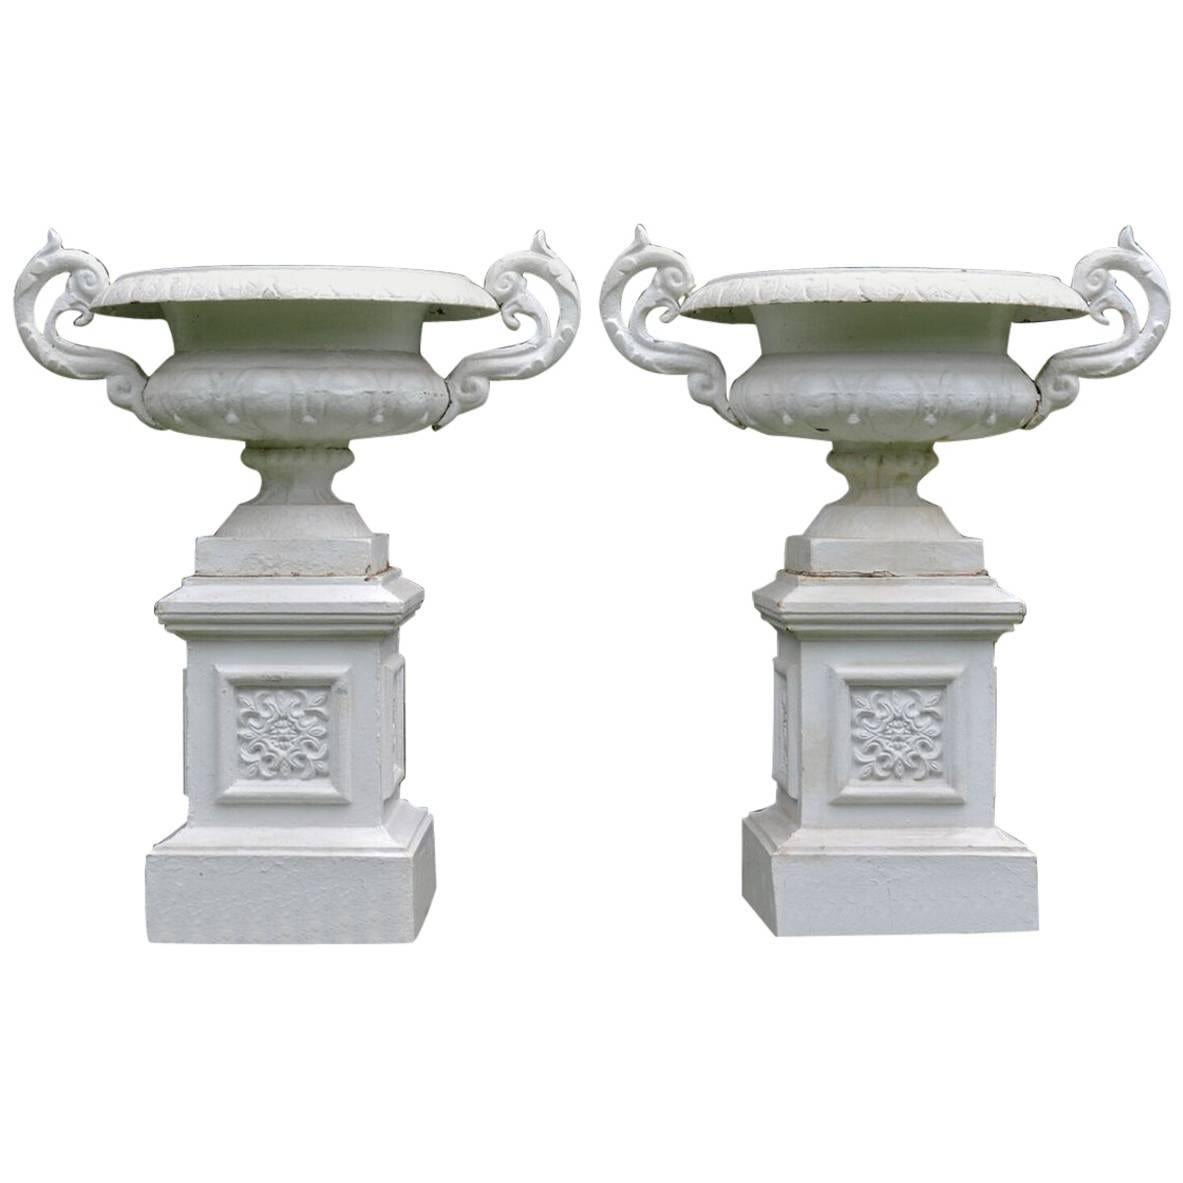 A Pair of White Painted Cast-Iron Urns on Pedestals